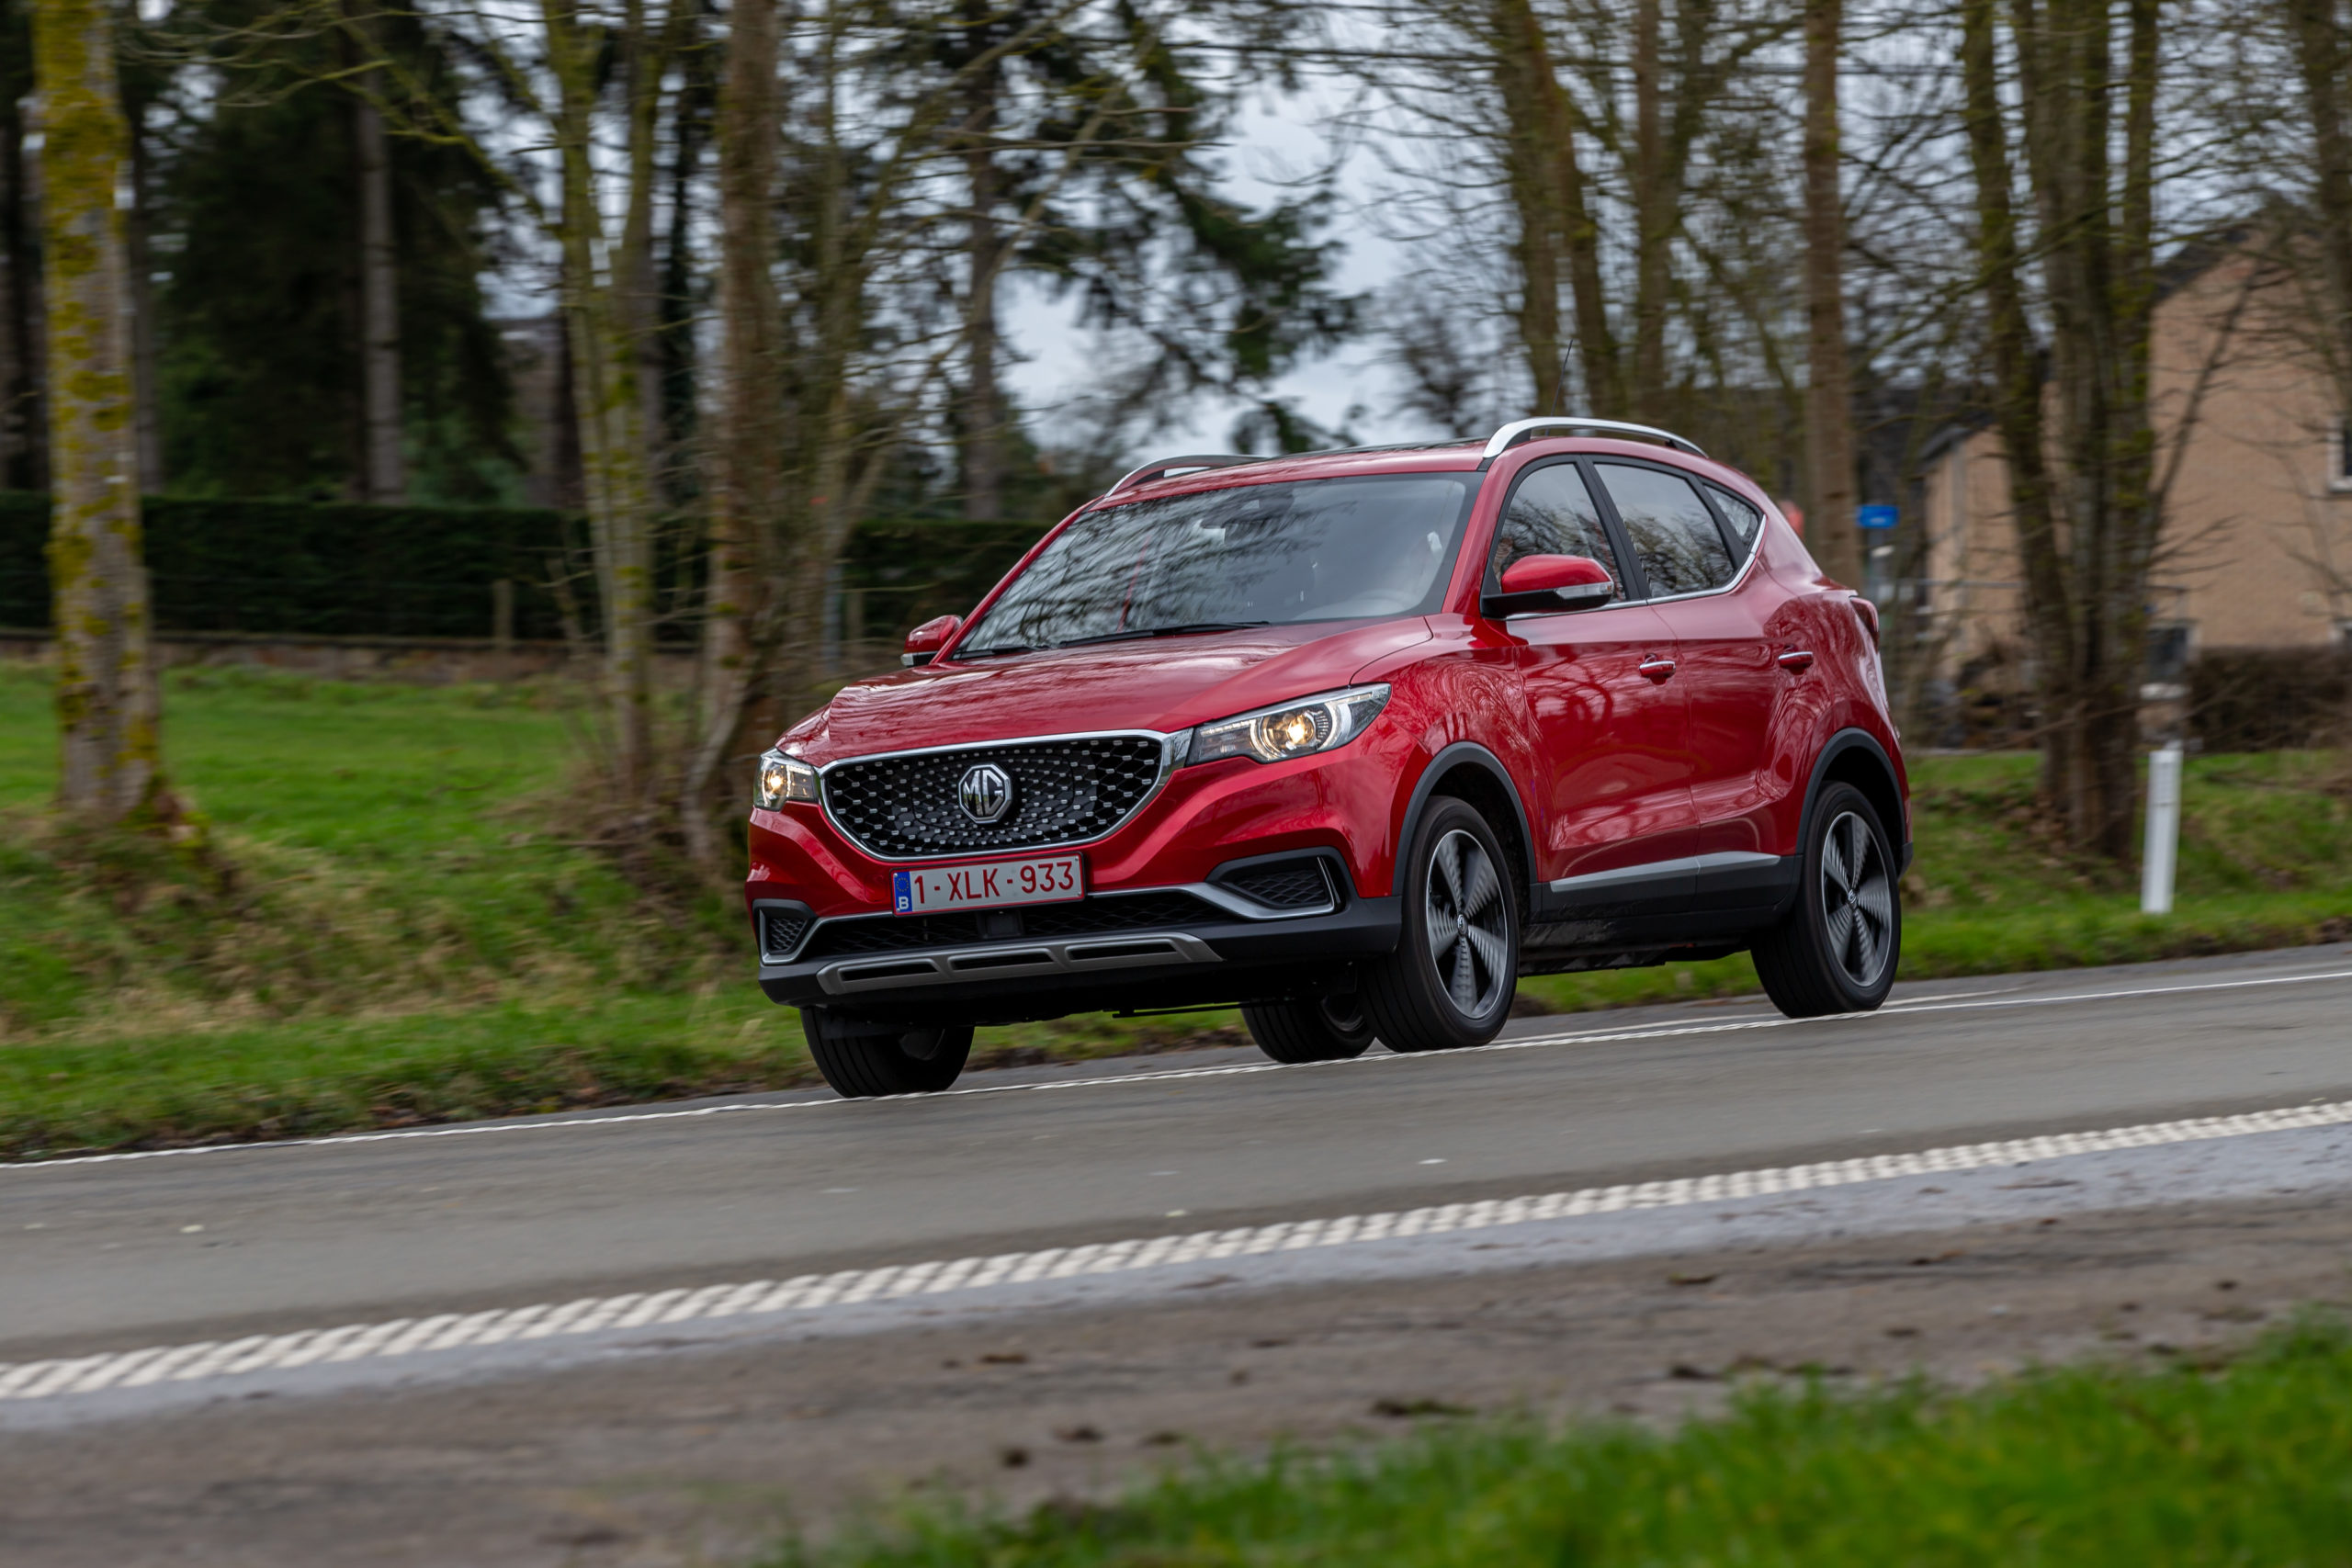 Driving the MG ZS, first Chinese EV on Belgian market